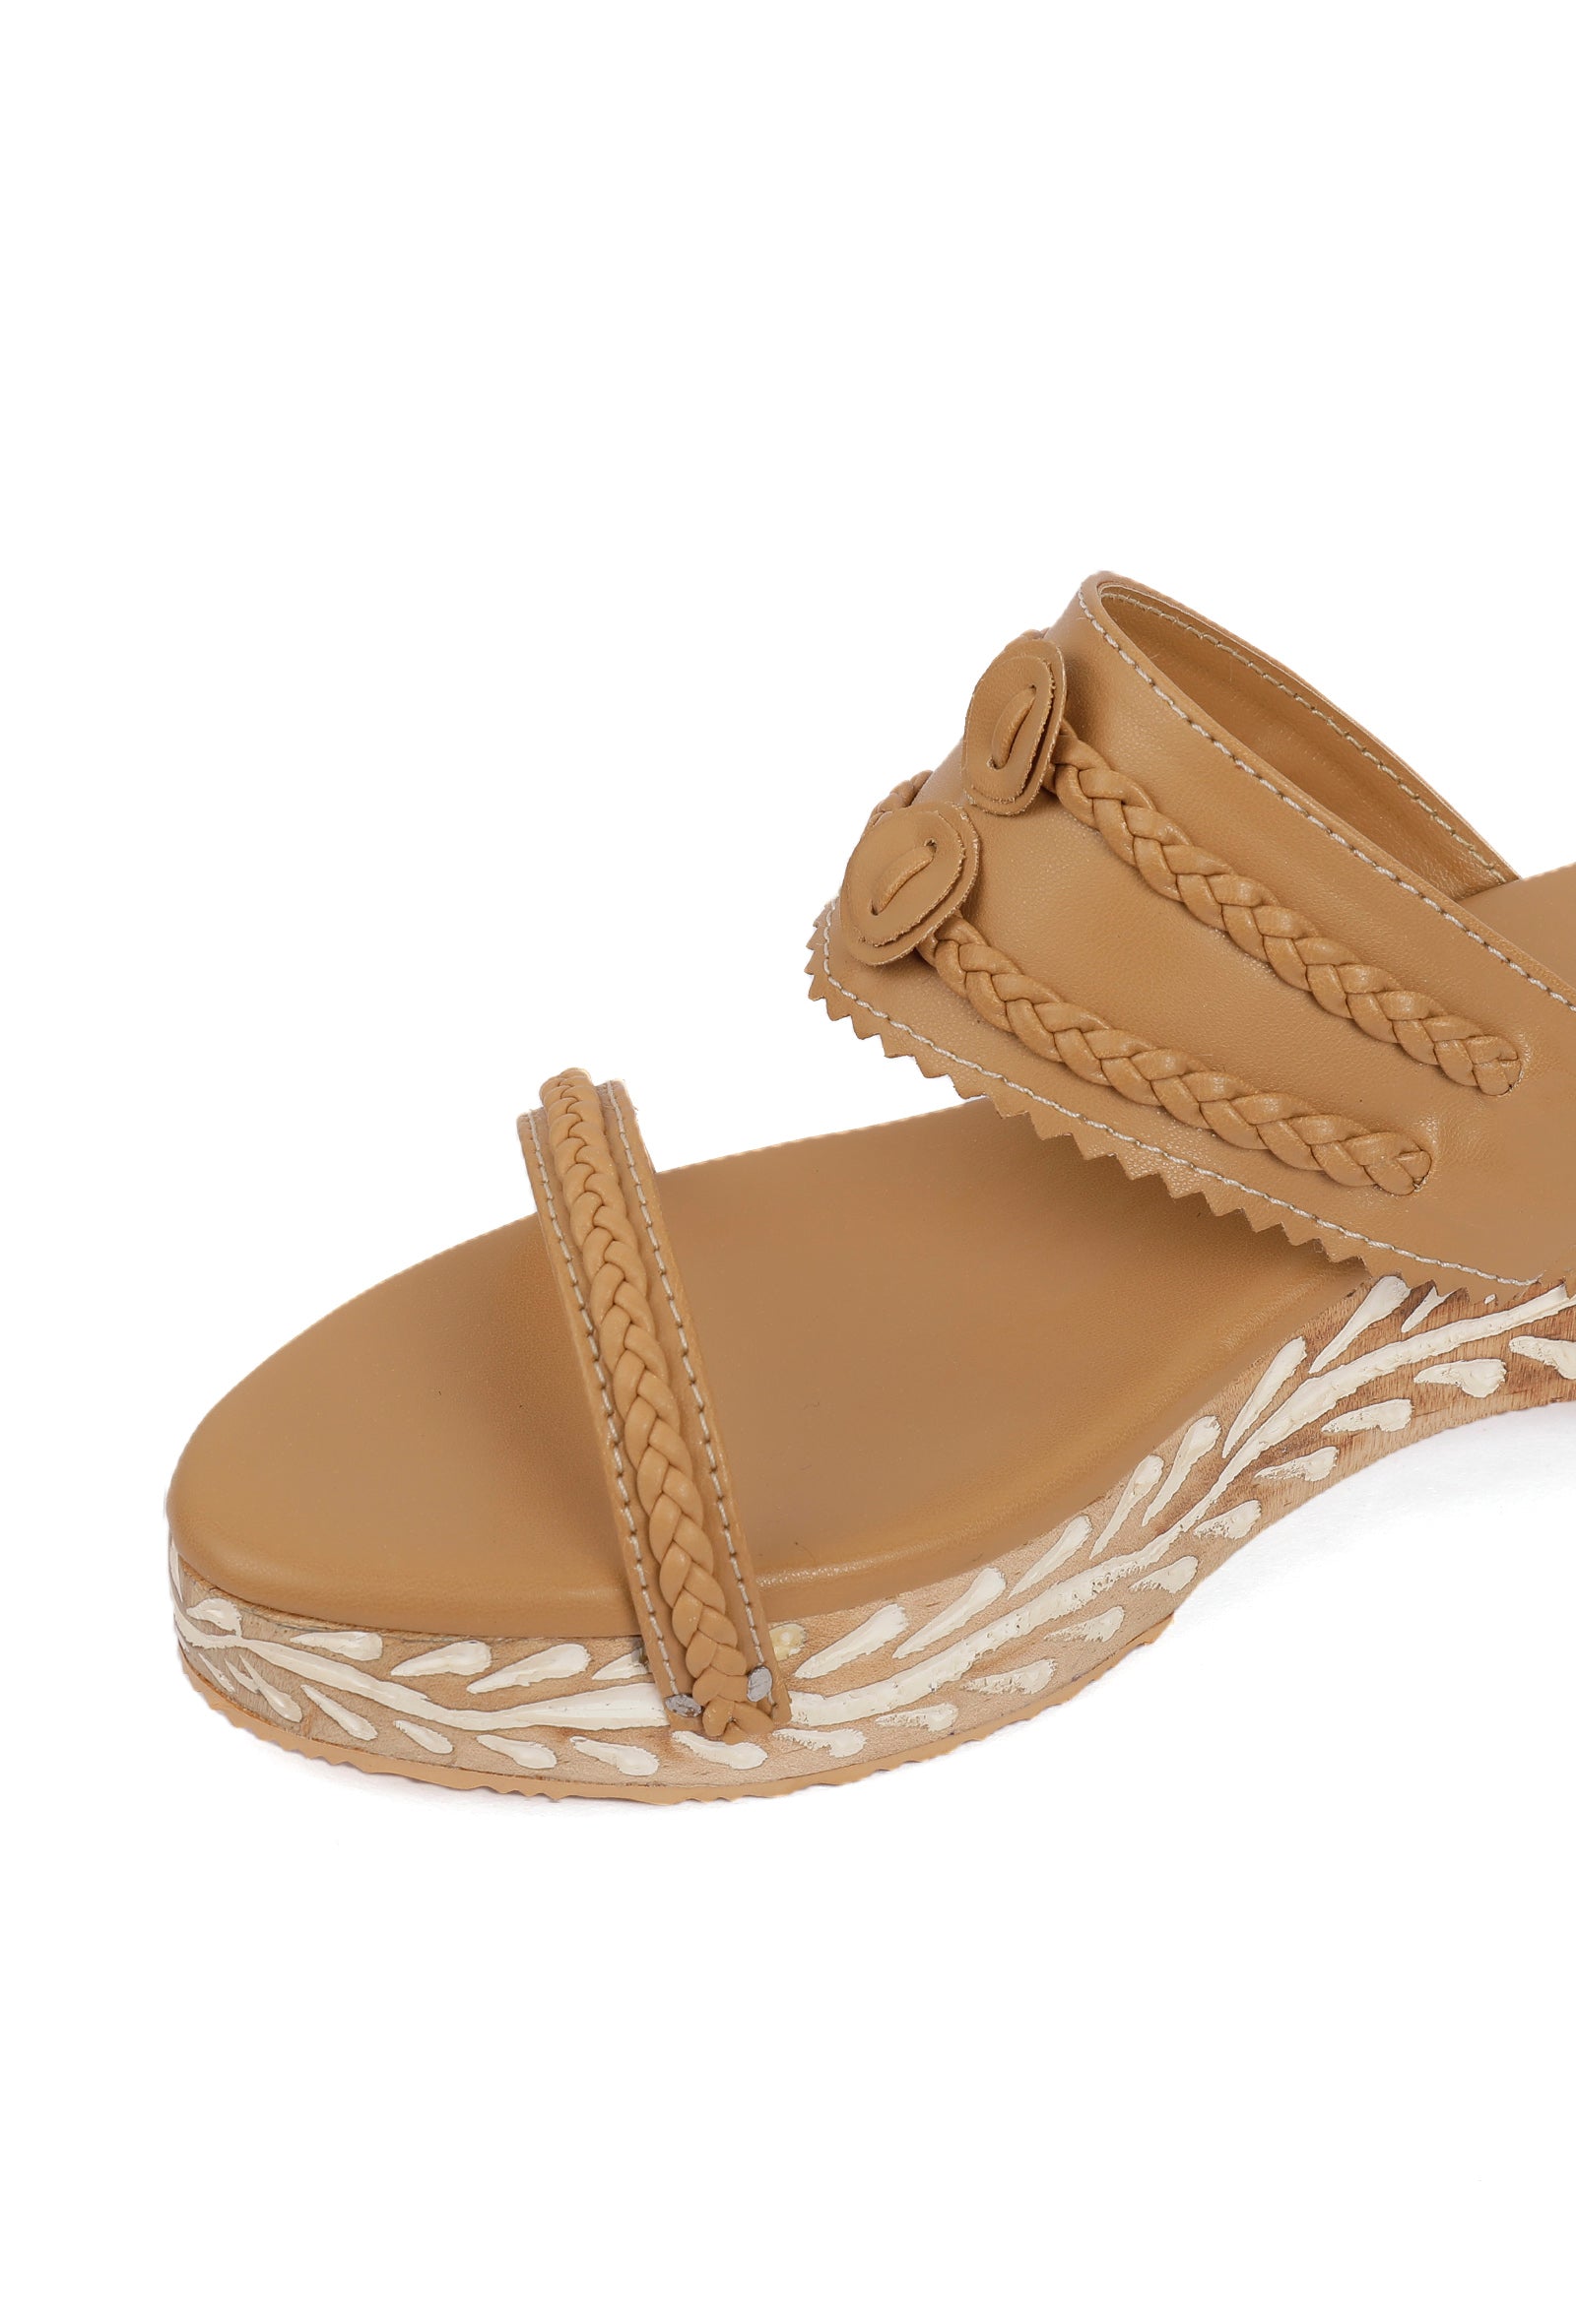 Tortilla Brown Wooden Carved Braided Wedges